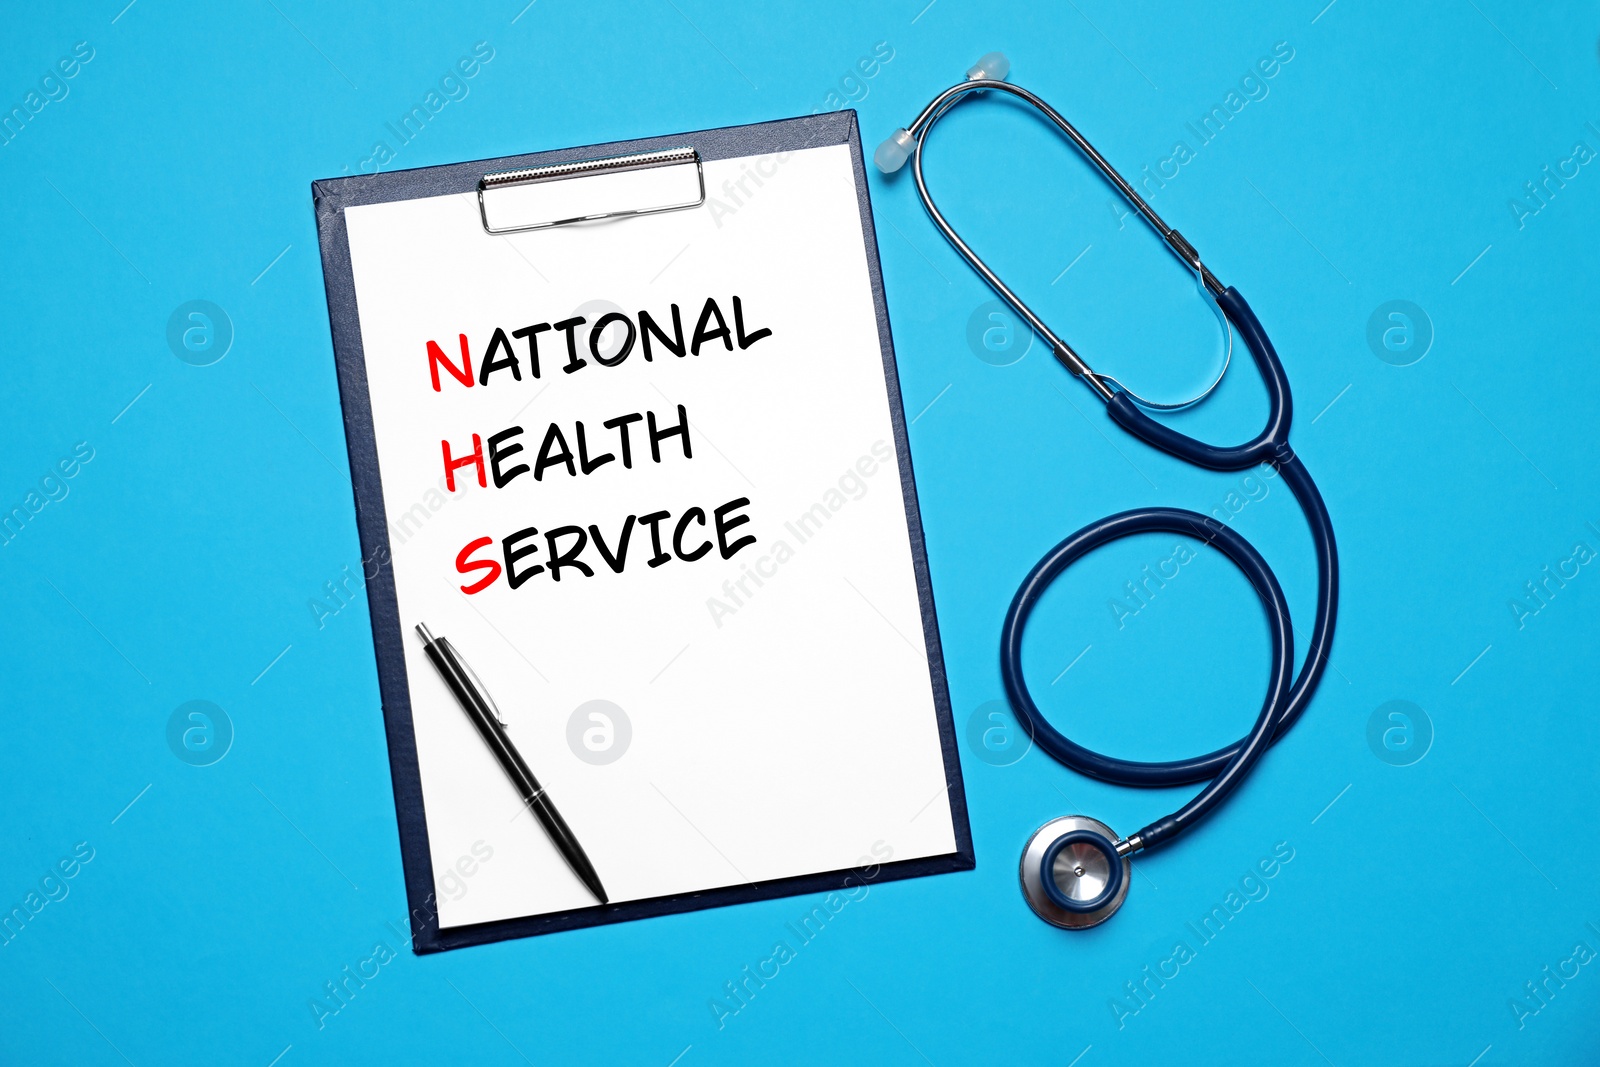 Image of National health service (NHS). Clipboard with text, pen and stethoscope on light blue background, top view